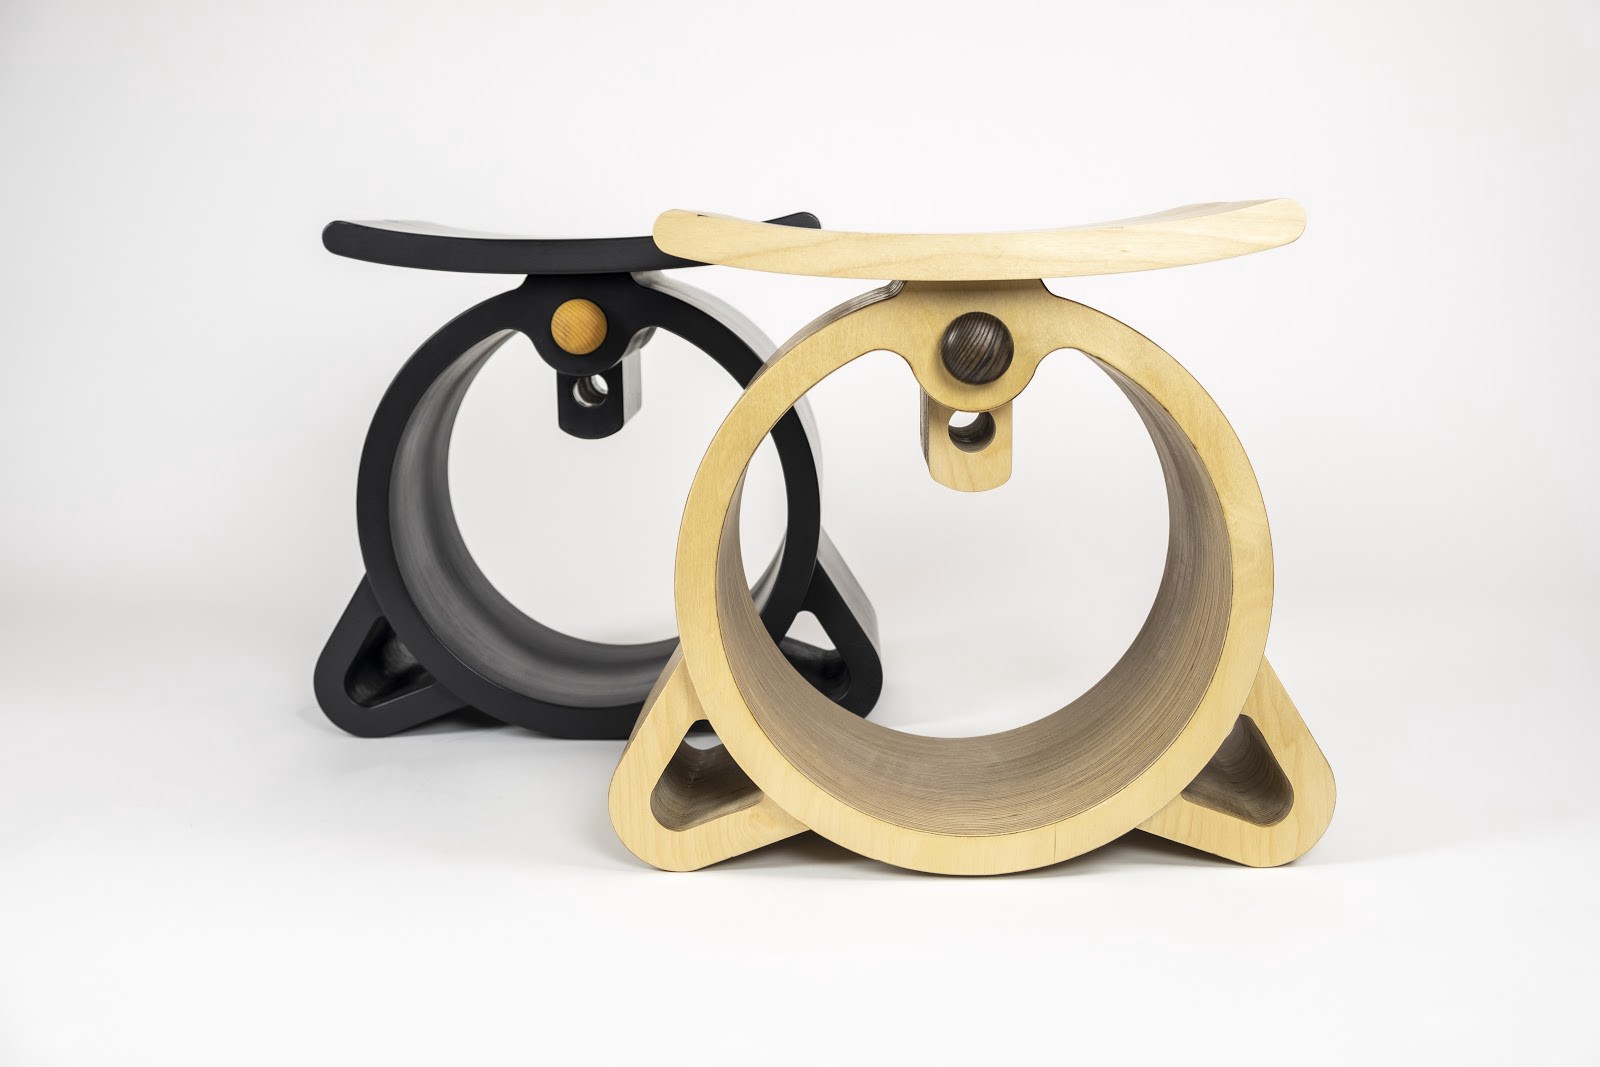 Two plywood stools, one blonde, one black. The bodies are big circles on their sides with short legs. Adjustable seat height.